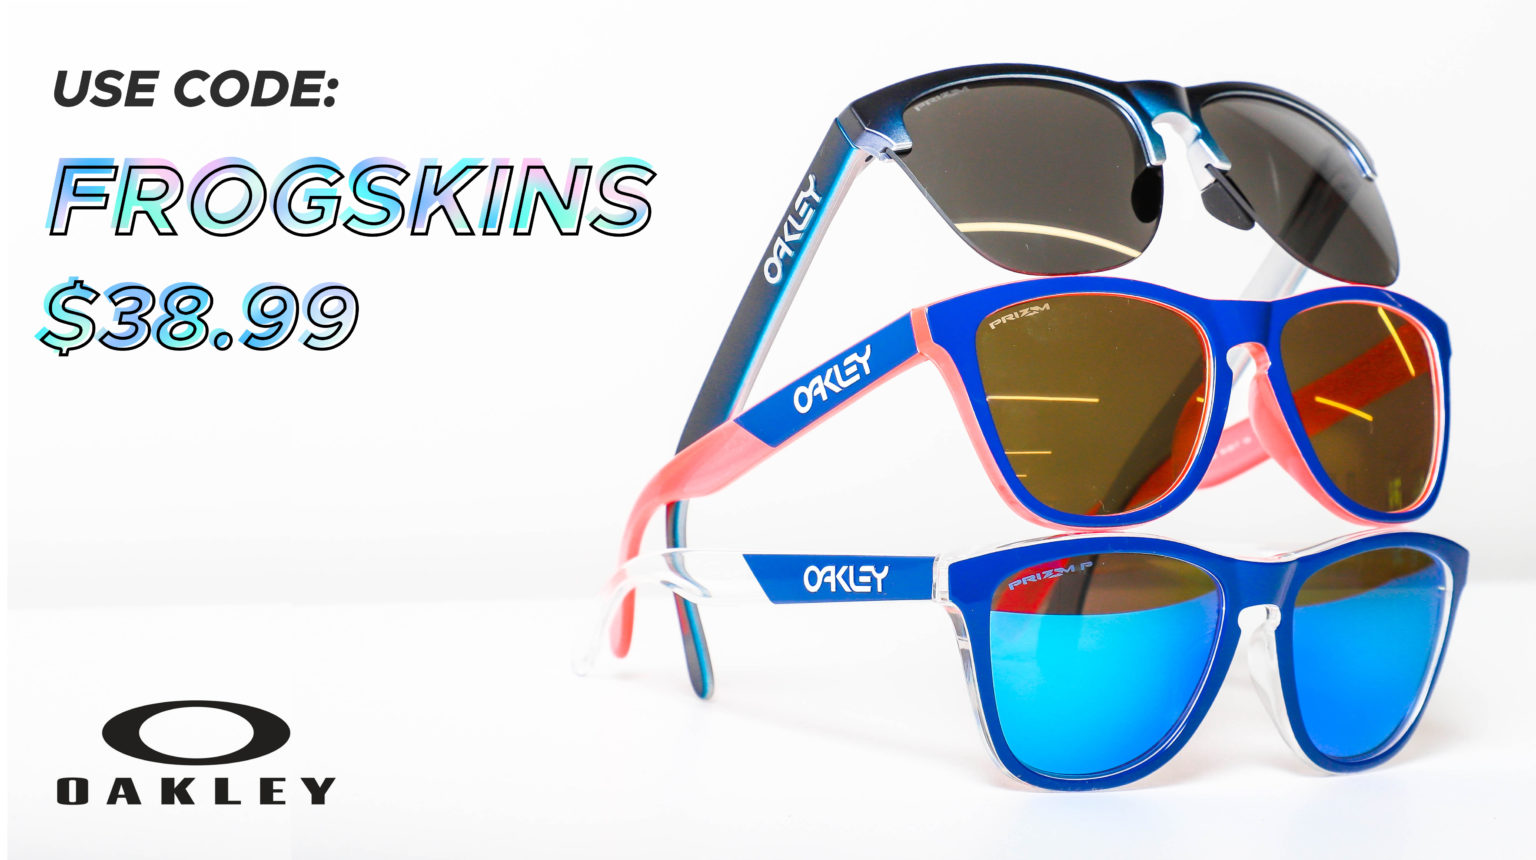 Oakley Sunglasses - Frogskins ONLY $38.99! - Become a Coupon Queen